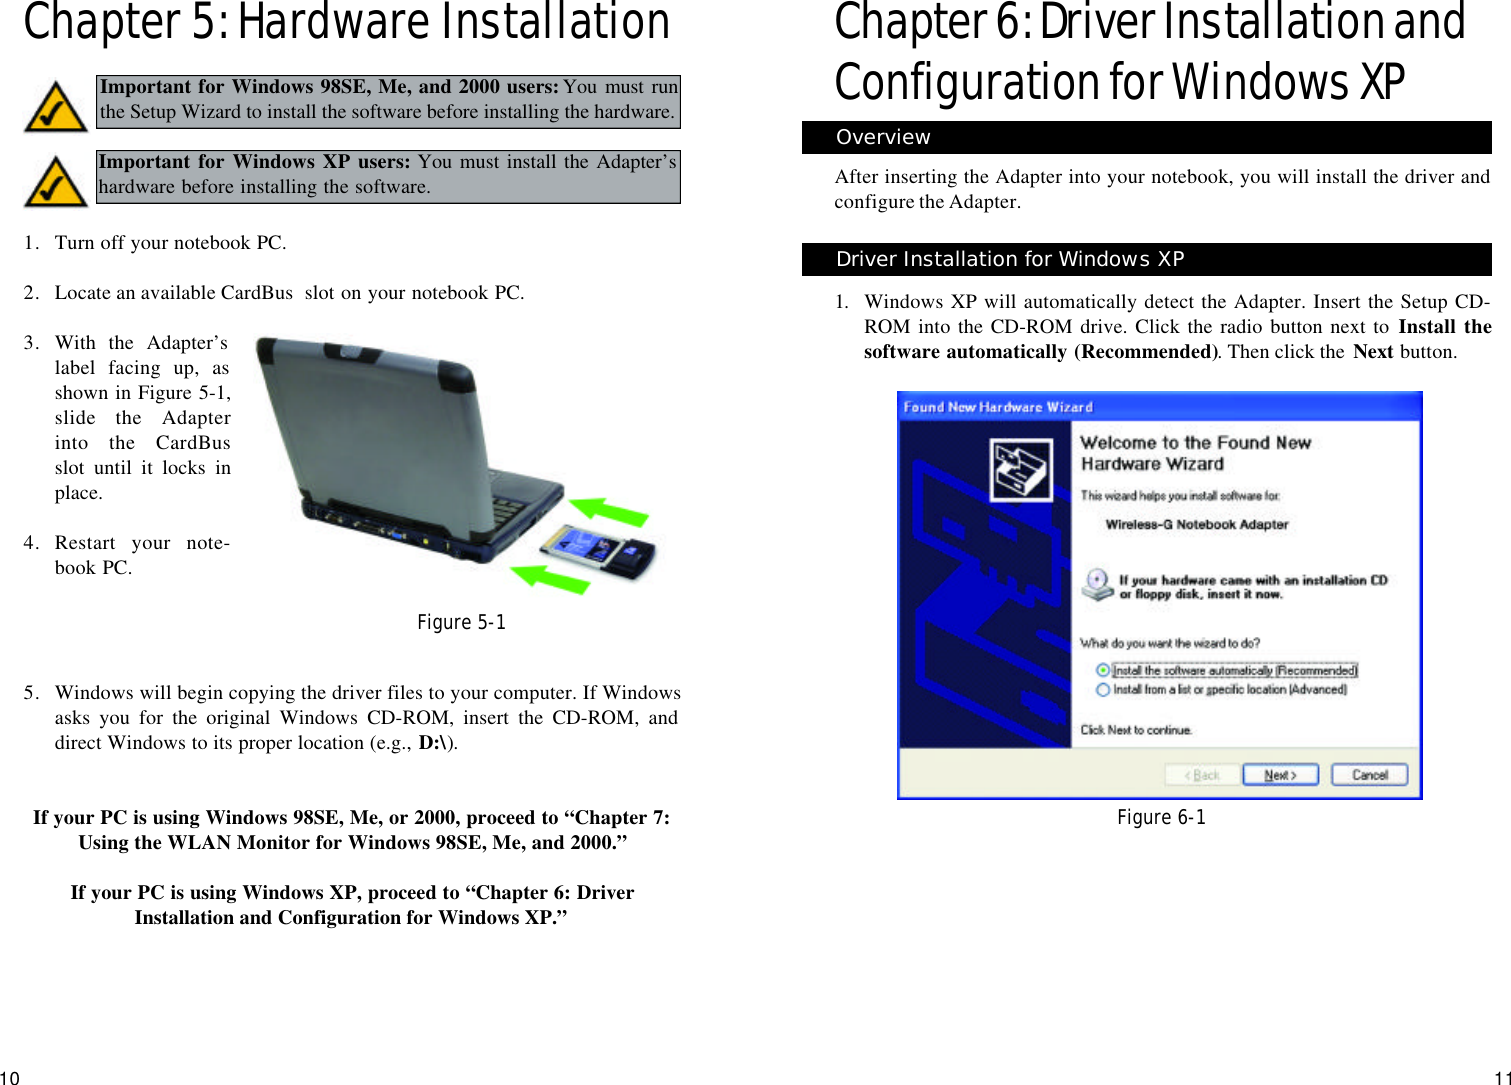 Chapter 6:Driver Installation andConfiguration for Windows XPAfter inserting the Adapter into your notebook, you will install the driver andconfigure the Adapter.1. Windows XP will automatically detect the Adapter. Insert the Setup CD-ROM into the CD-ROM drive. Click the radio button next to Install thesoftware automatically (Recommended). Then click the  Next button.11Figure 6-1OverviewDriver Installation for Windows XP10Chapter 5: Hardware Installation1. Turn off your notebook PC.  2. Locate an available CardBus  slot on your notebook PC. 3. With the Adapter’slabel facing up, asshown in Figure 5-1,slide the Adapterinto the CardBusslot until it locks inplace.4. Restart your note-book PC. 5. Windows will begin copying the driver files to your computer. If Windowsasks you for the original Windows CD-ROM, insert the CD-ROM, anddirect Windows to its proper location (e.g., D:\).If your PC is using Windows 98SE, Me, or 2000, proceed to “Chapter 7:Using the WLAN Monitor for Windows 98SE, Me, and 2000.” If your PC is using Windows XP, proceed to “Chapter 6: DriverInstallation and Configuration for Windows XP.”Figure 5-1Important for Windows 98SE, Me, and 2000 users:You must runthe Setup Wizard to install the software before installing the hardware.Important for Windows XP users: You must install the Adapter’shardware before installing the software.